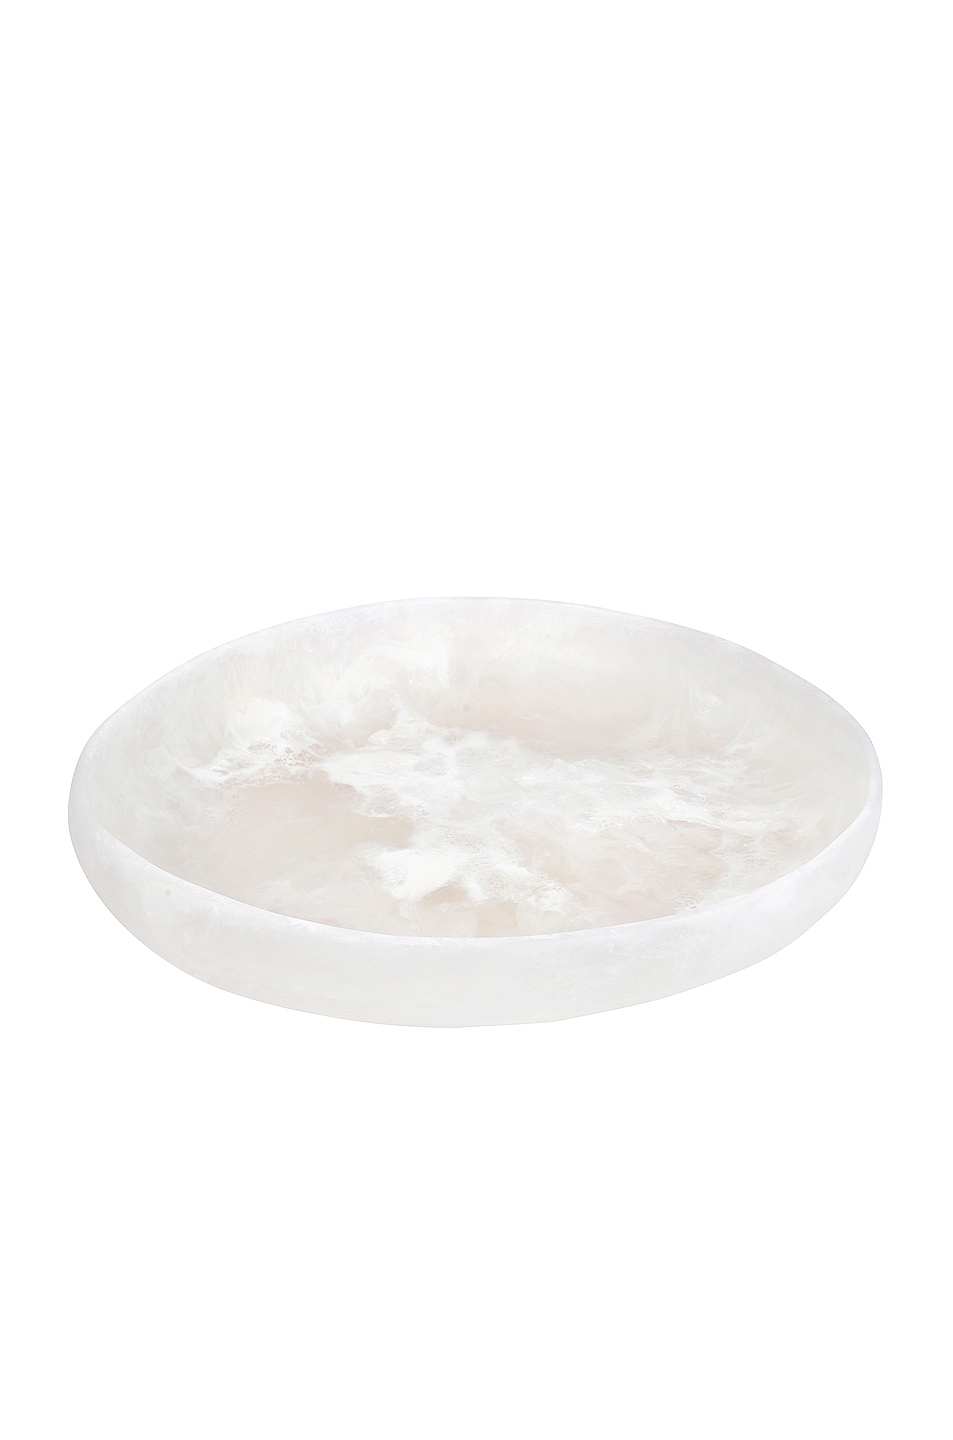 Image 1 of DINOSAUR DESIGNS Large Earth Bowl in Swirl White & Clear